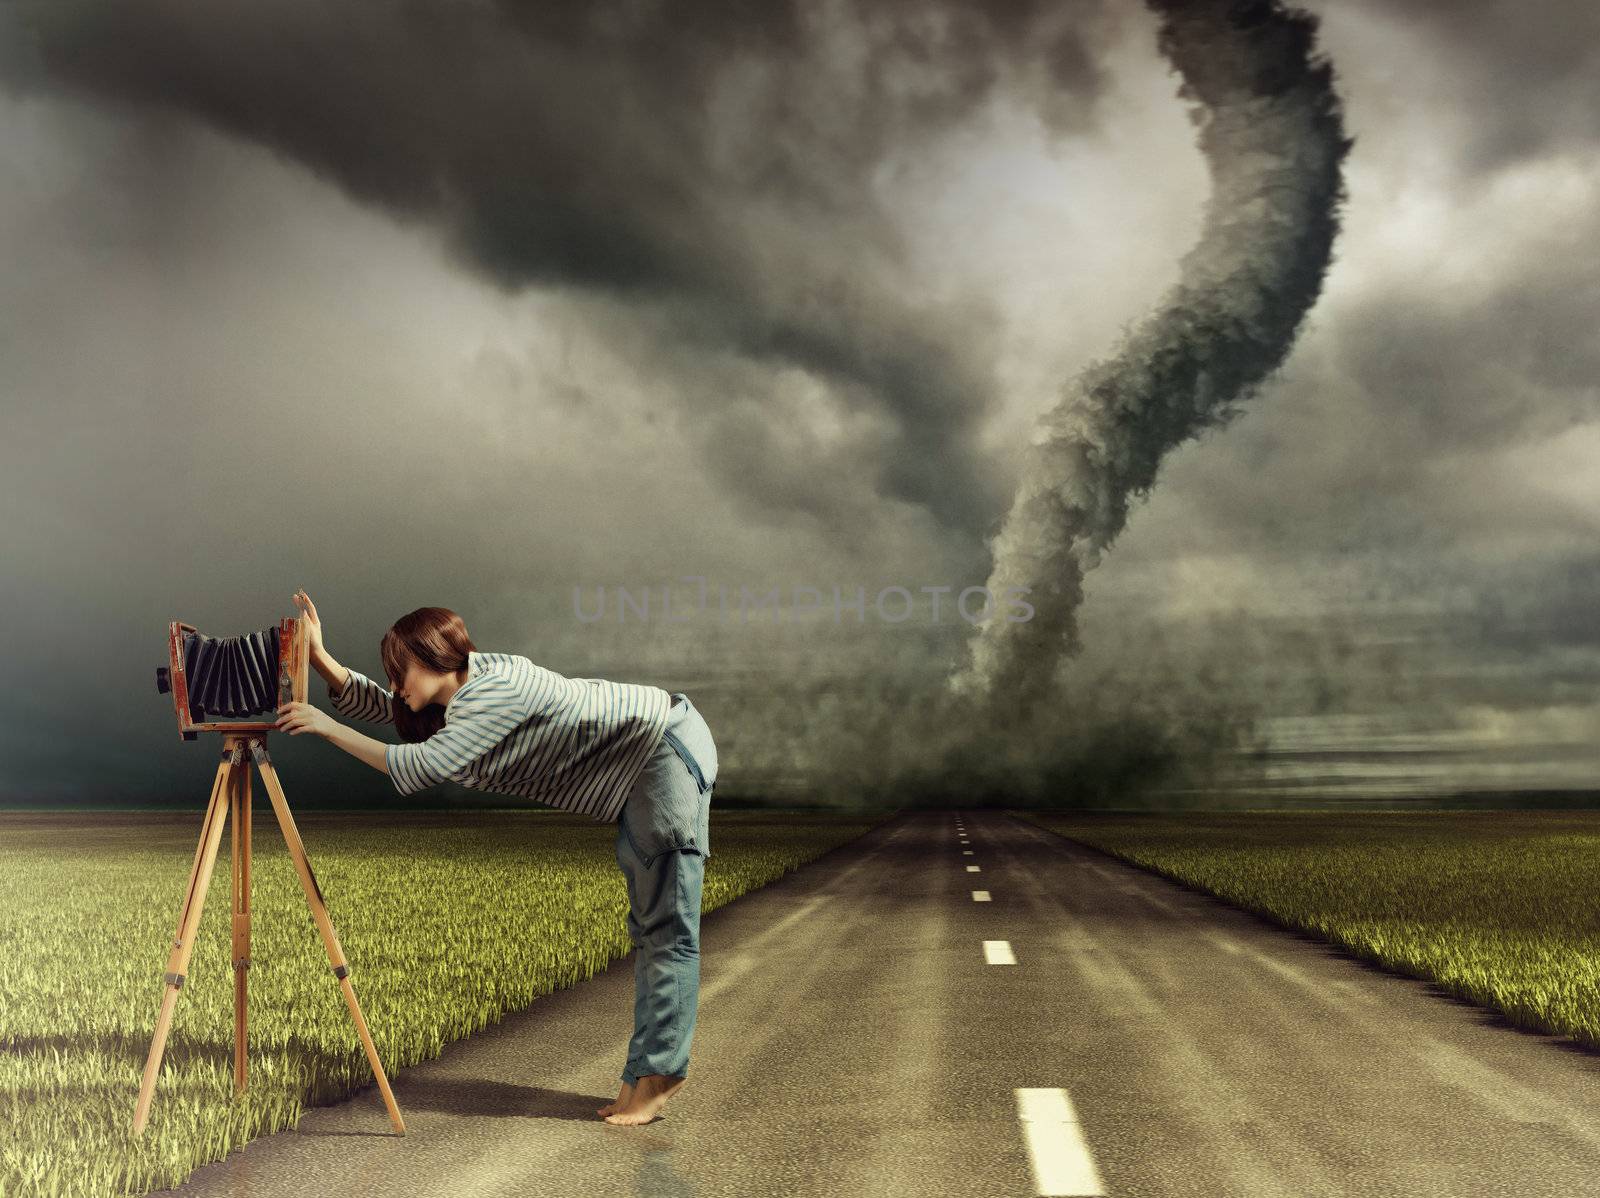 photographer and tornado by vicnt